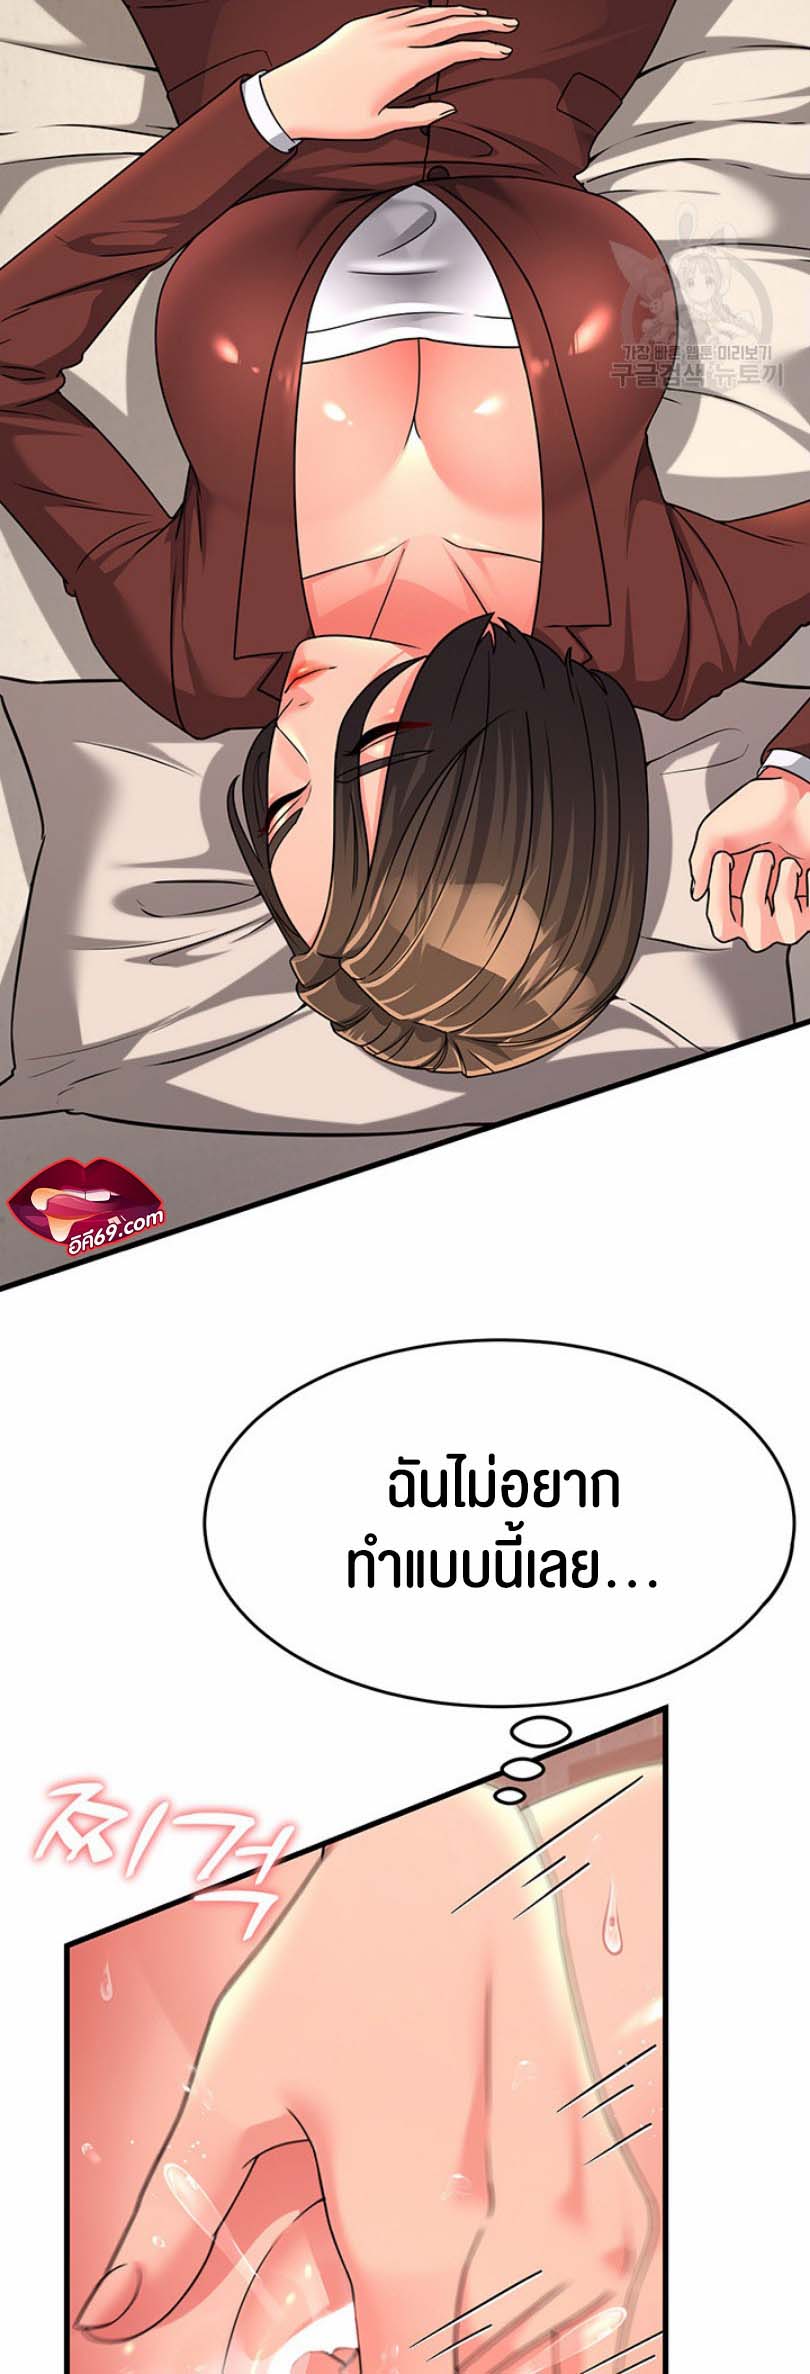 à¸­à¹ˆà¸²à¸™à¹‚à¸”à¸ˆà¸´à¸™ à¹€à¸£à¸·à¹ˆà¸­à¸‡ Mother in Law Bends To My Will 10 40